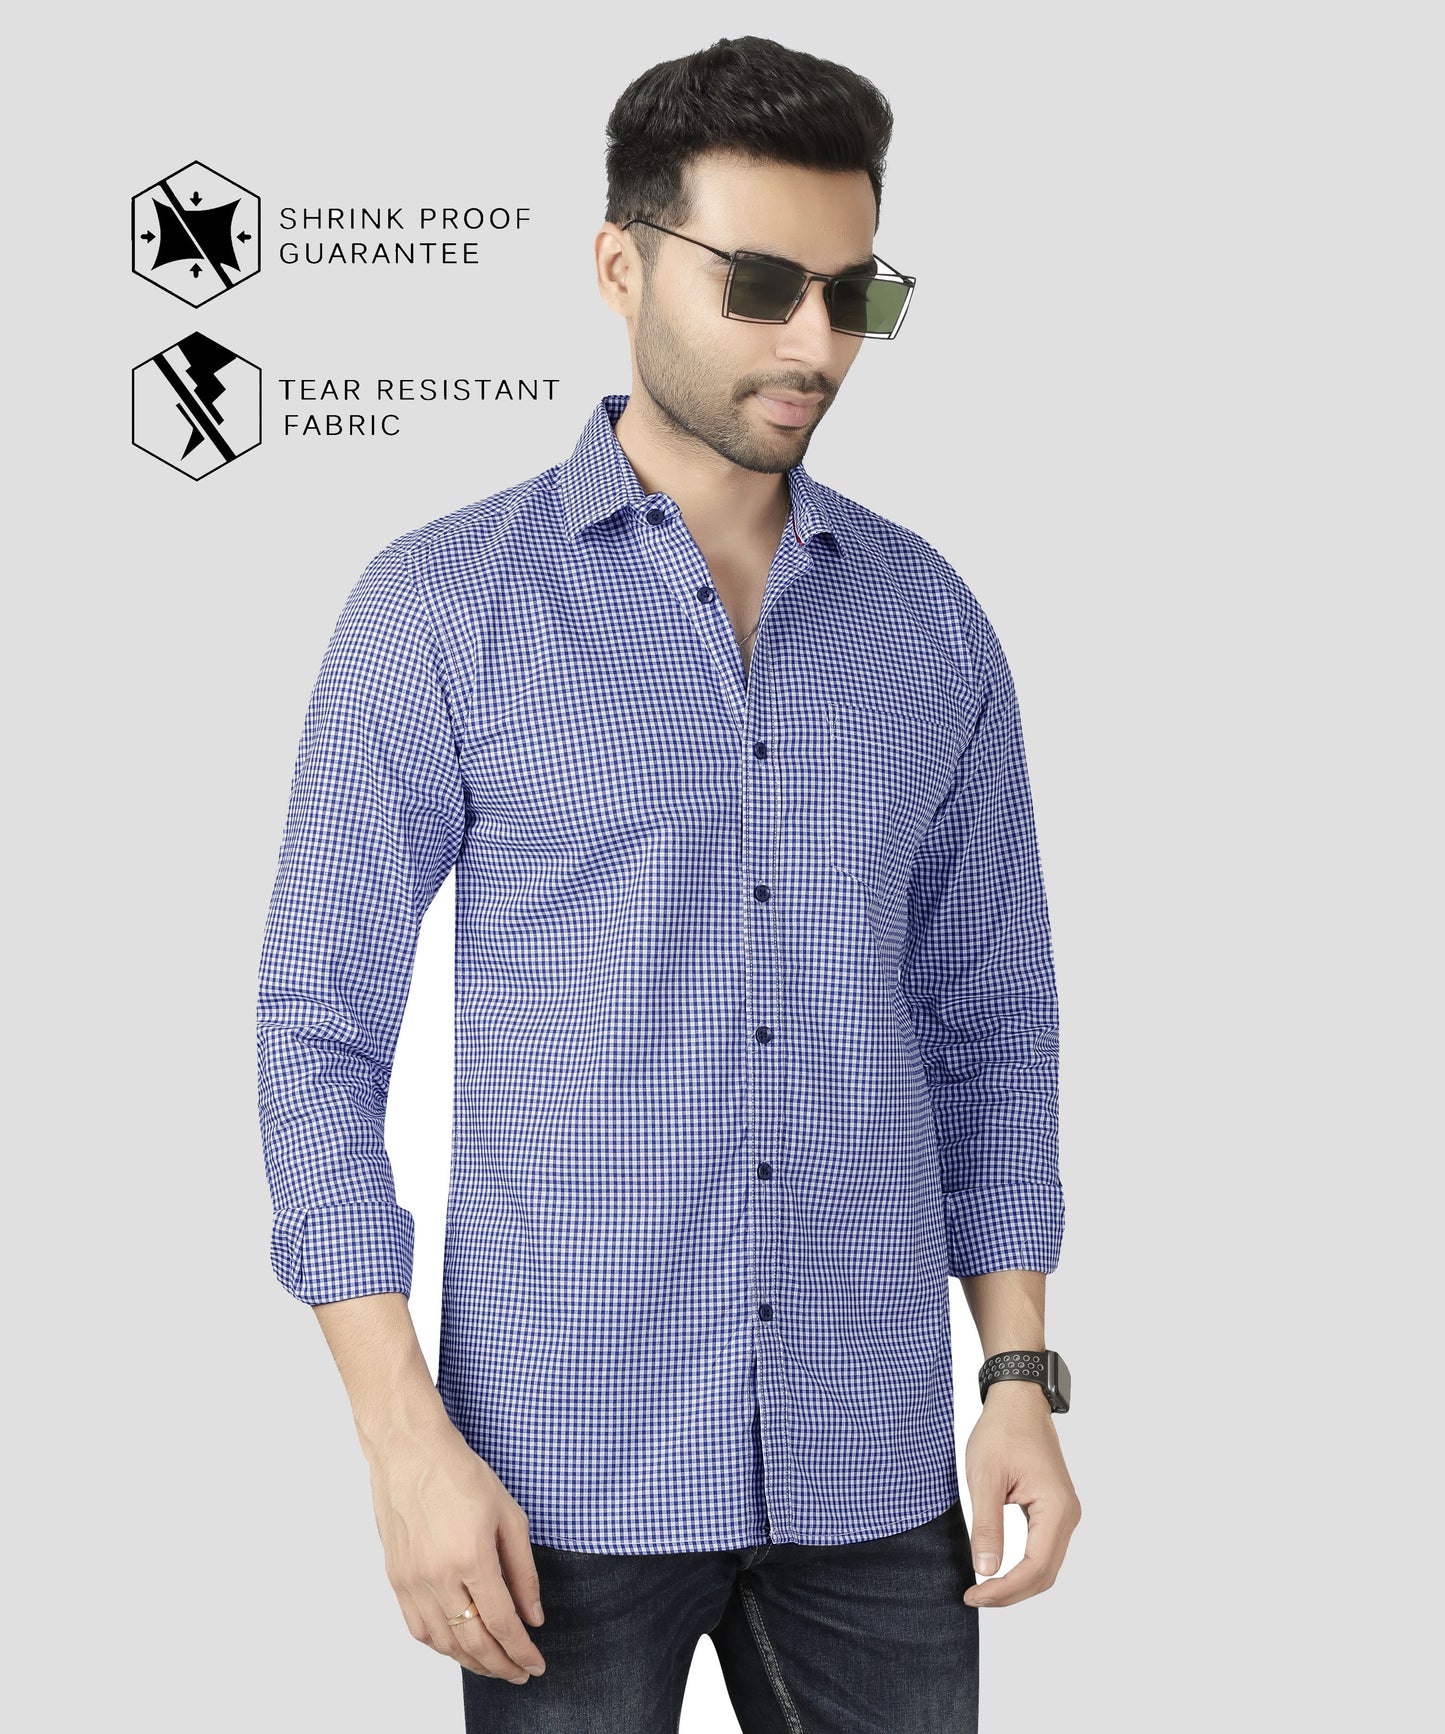 5thanfold Men's Casual Pure Cotton Full Sleeve Checkered Blue Regular Fit Shirt